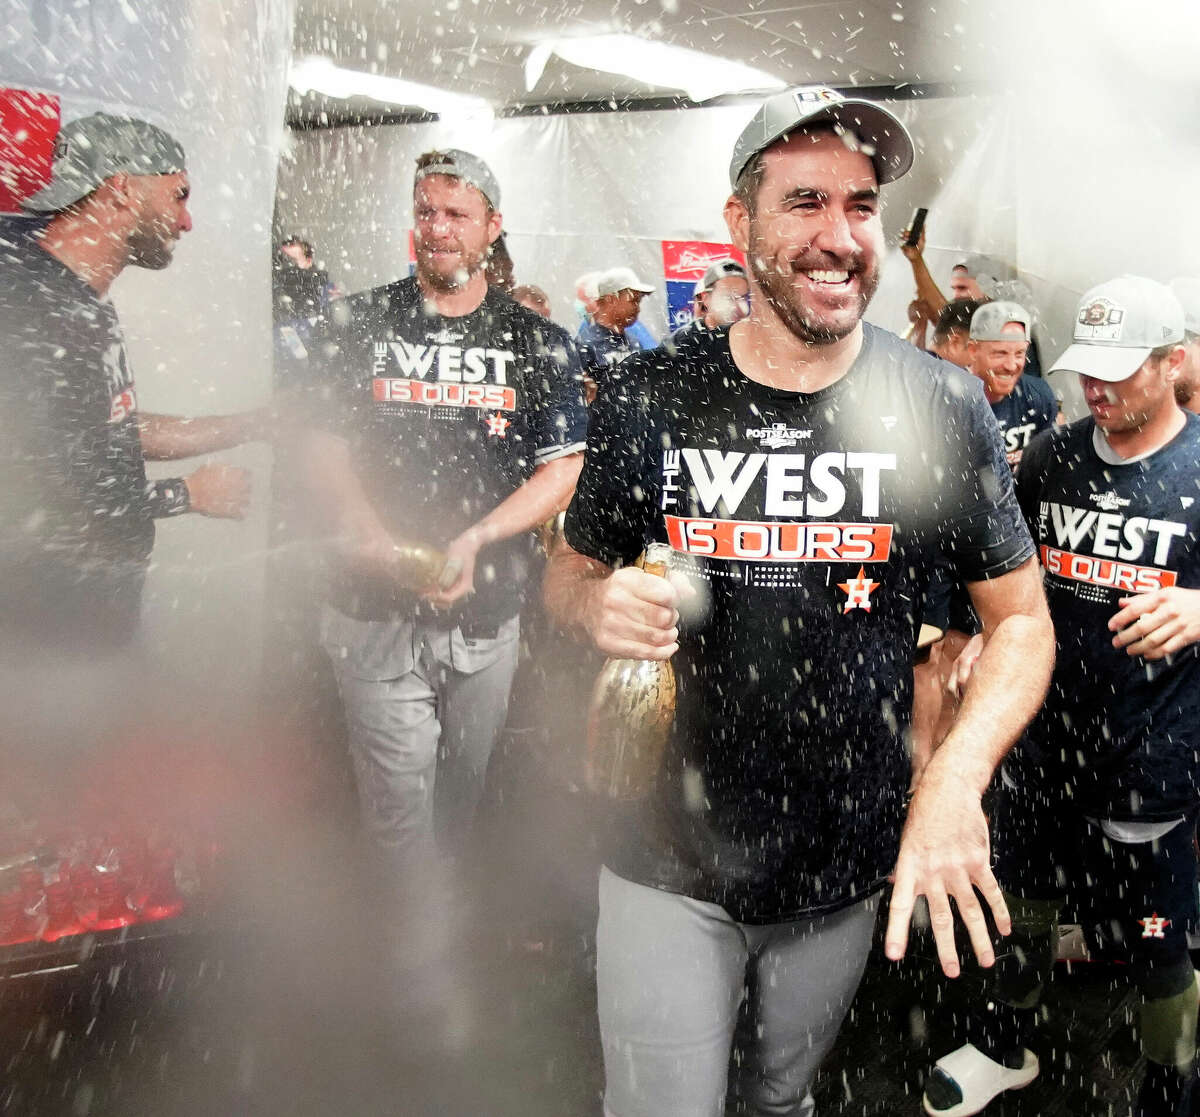 Houston Astros pitcher Justin Verlander in the locker room celebrating after they clinched the AL West after beating the Tampa Bay Rays during an MLB baseball game at Tropicana Field on Monday, Sept. 19, 2022 in St. Petersburg.